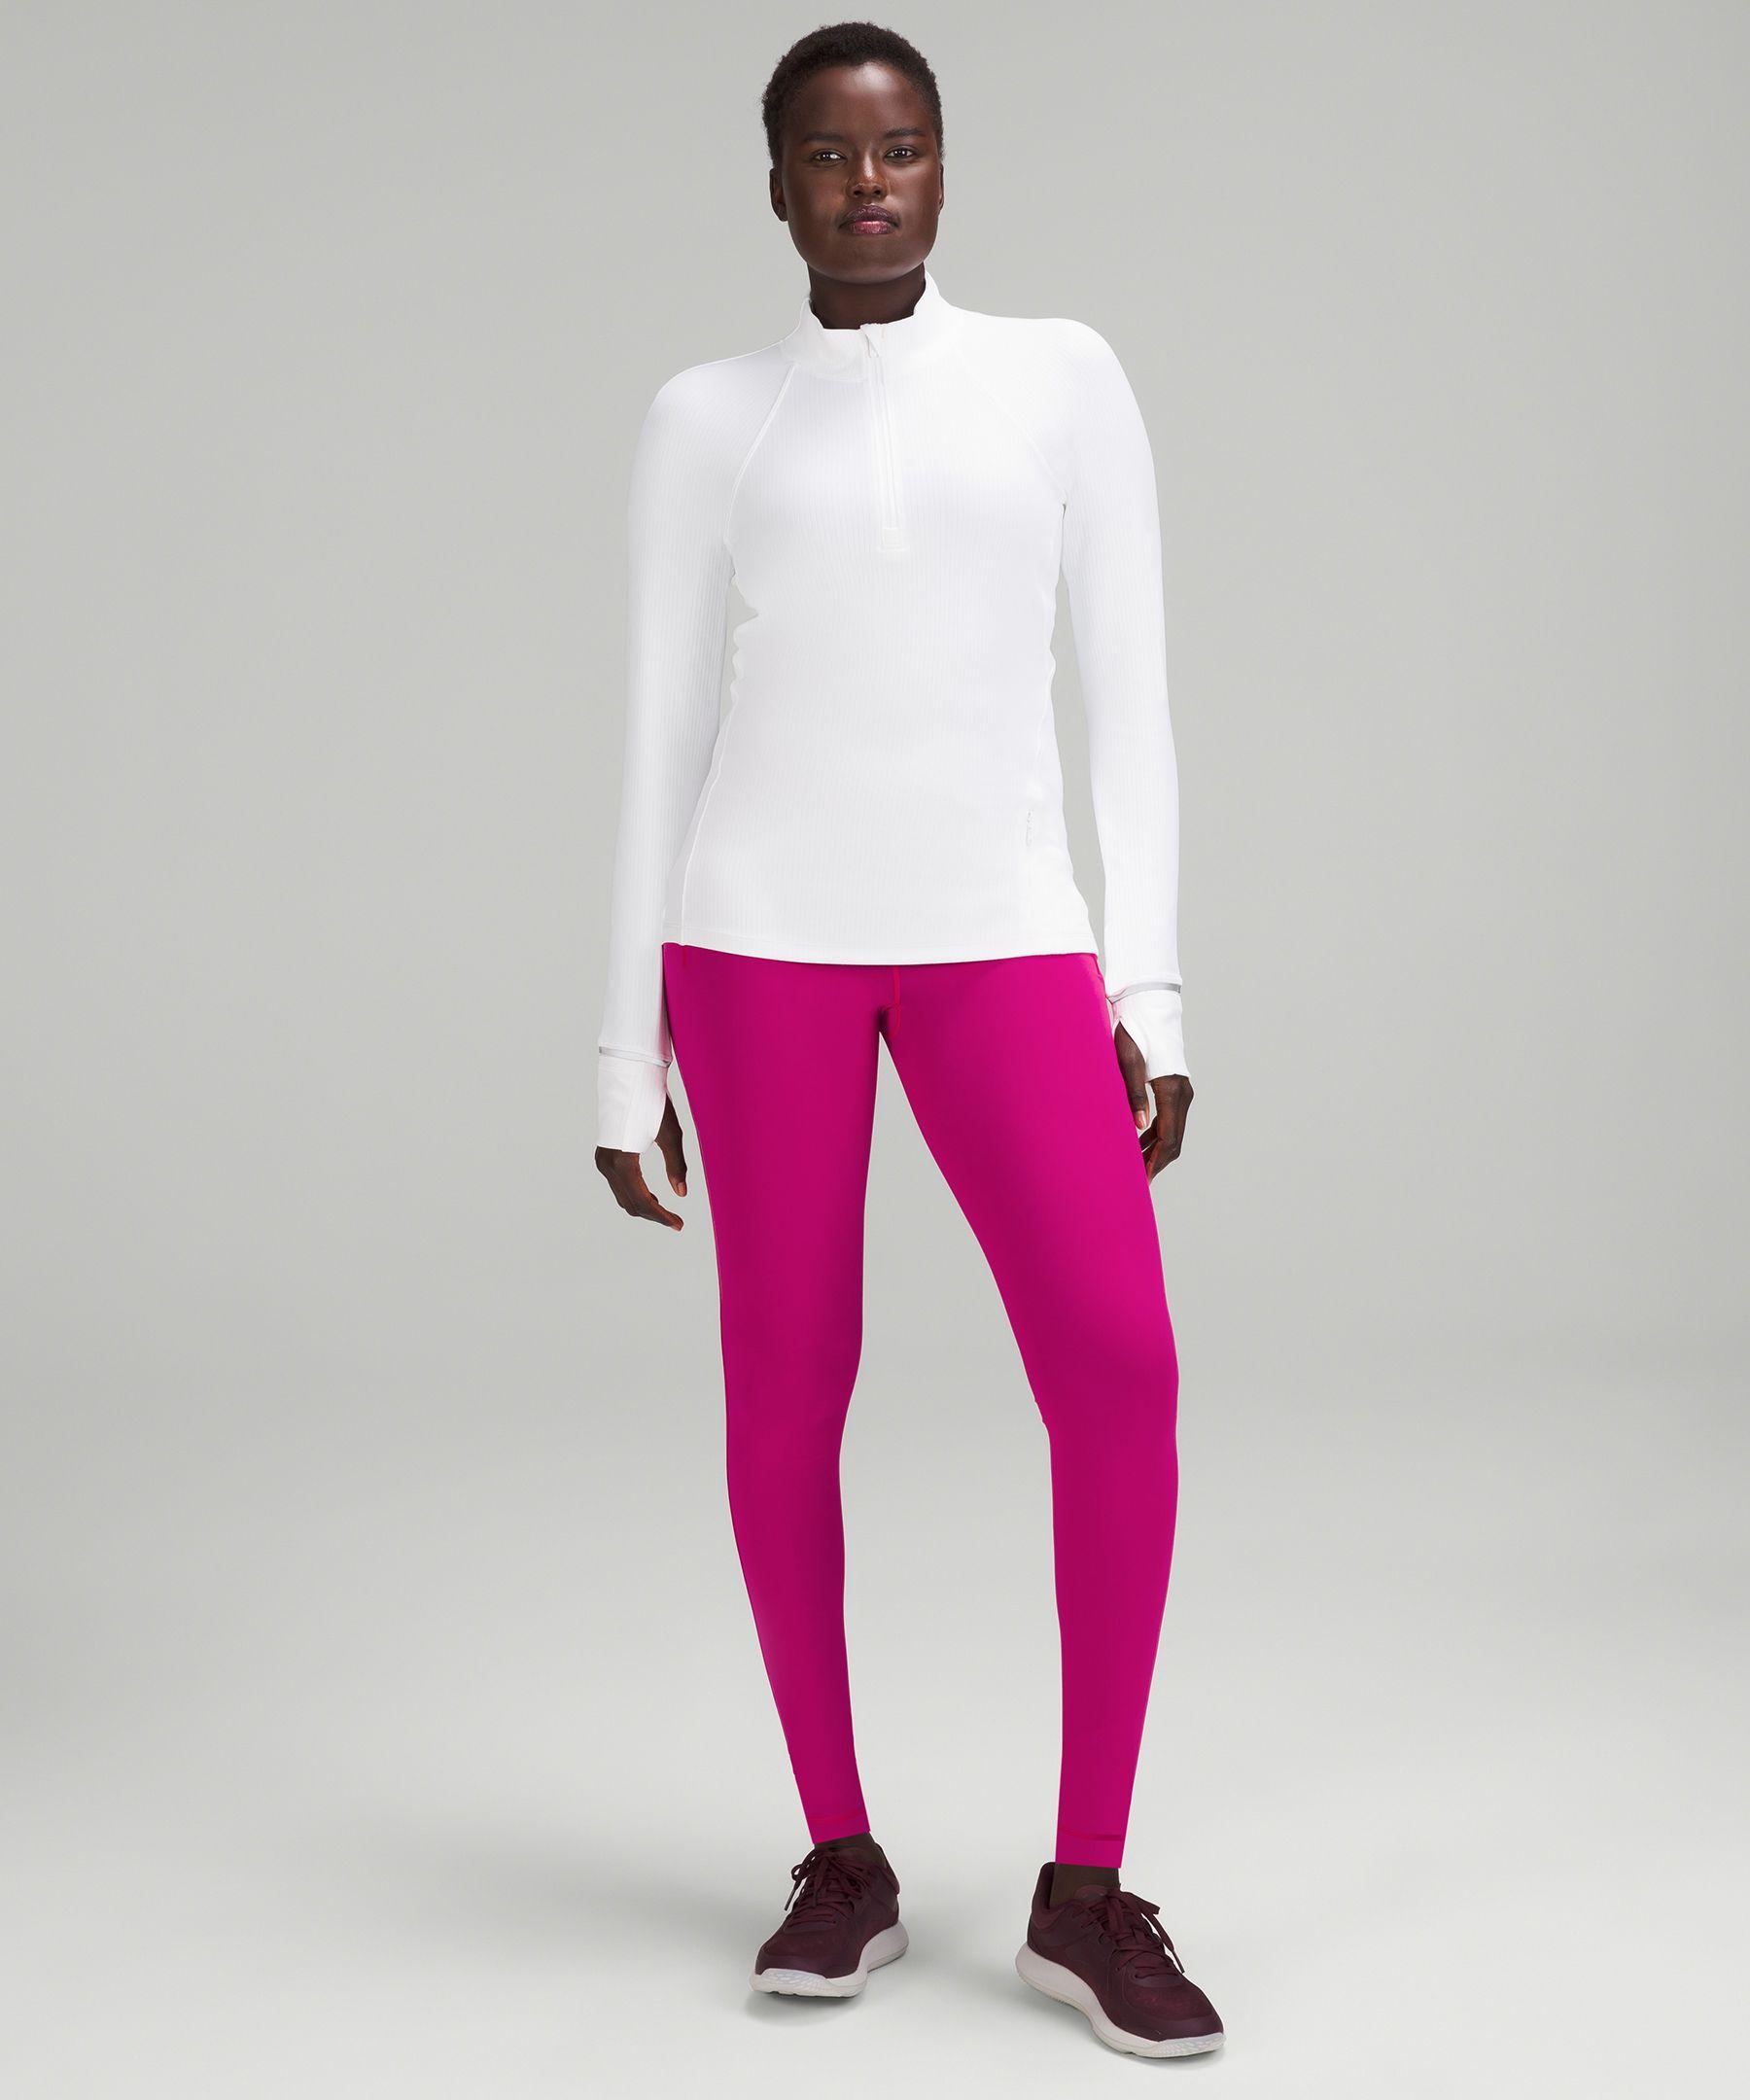 lululemon athletica Swift Speed High-rise Tight Leggings - 28 - Color Pink/ neon - Size 12